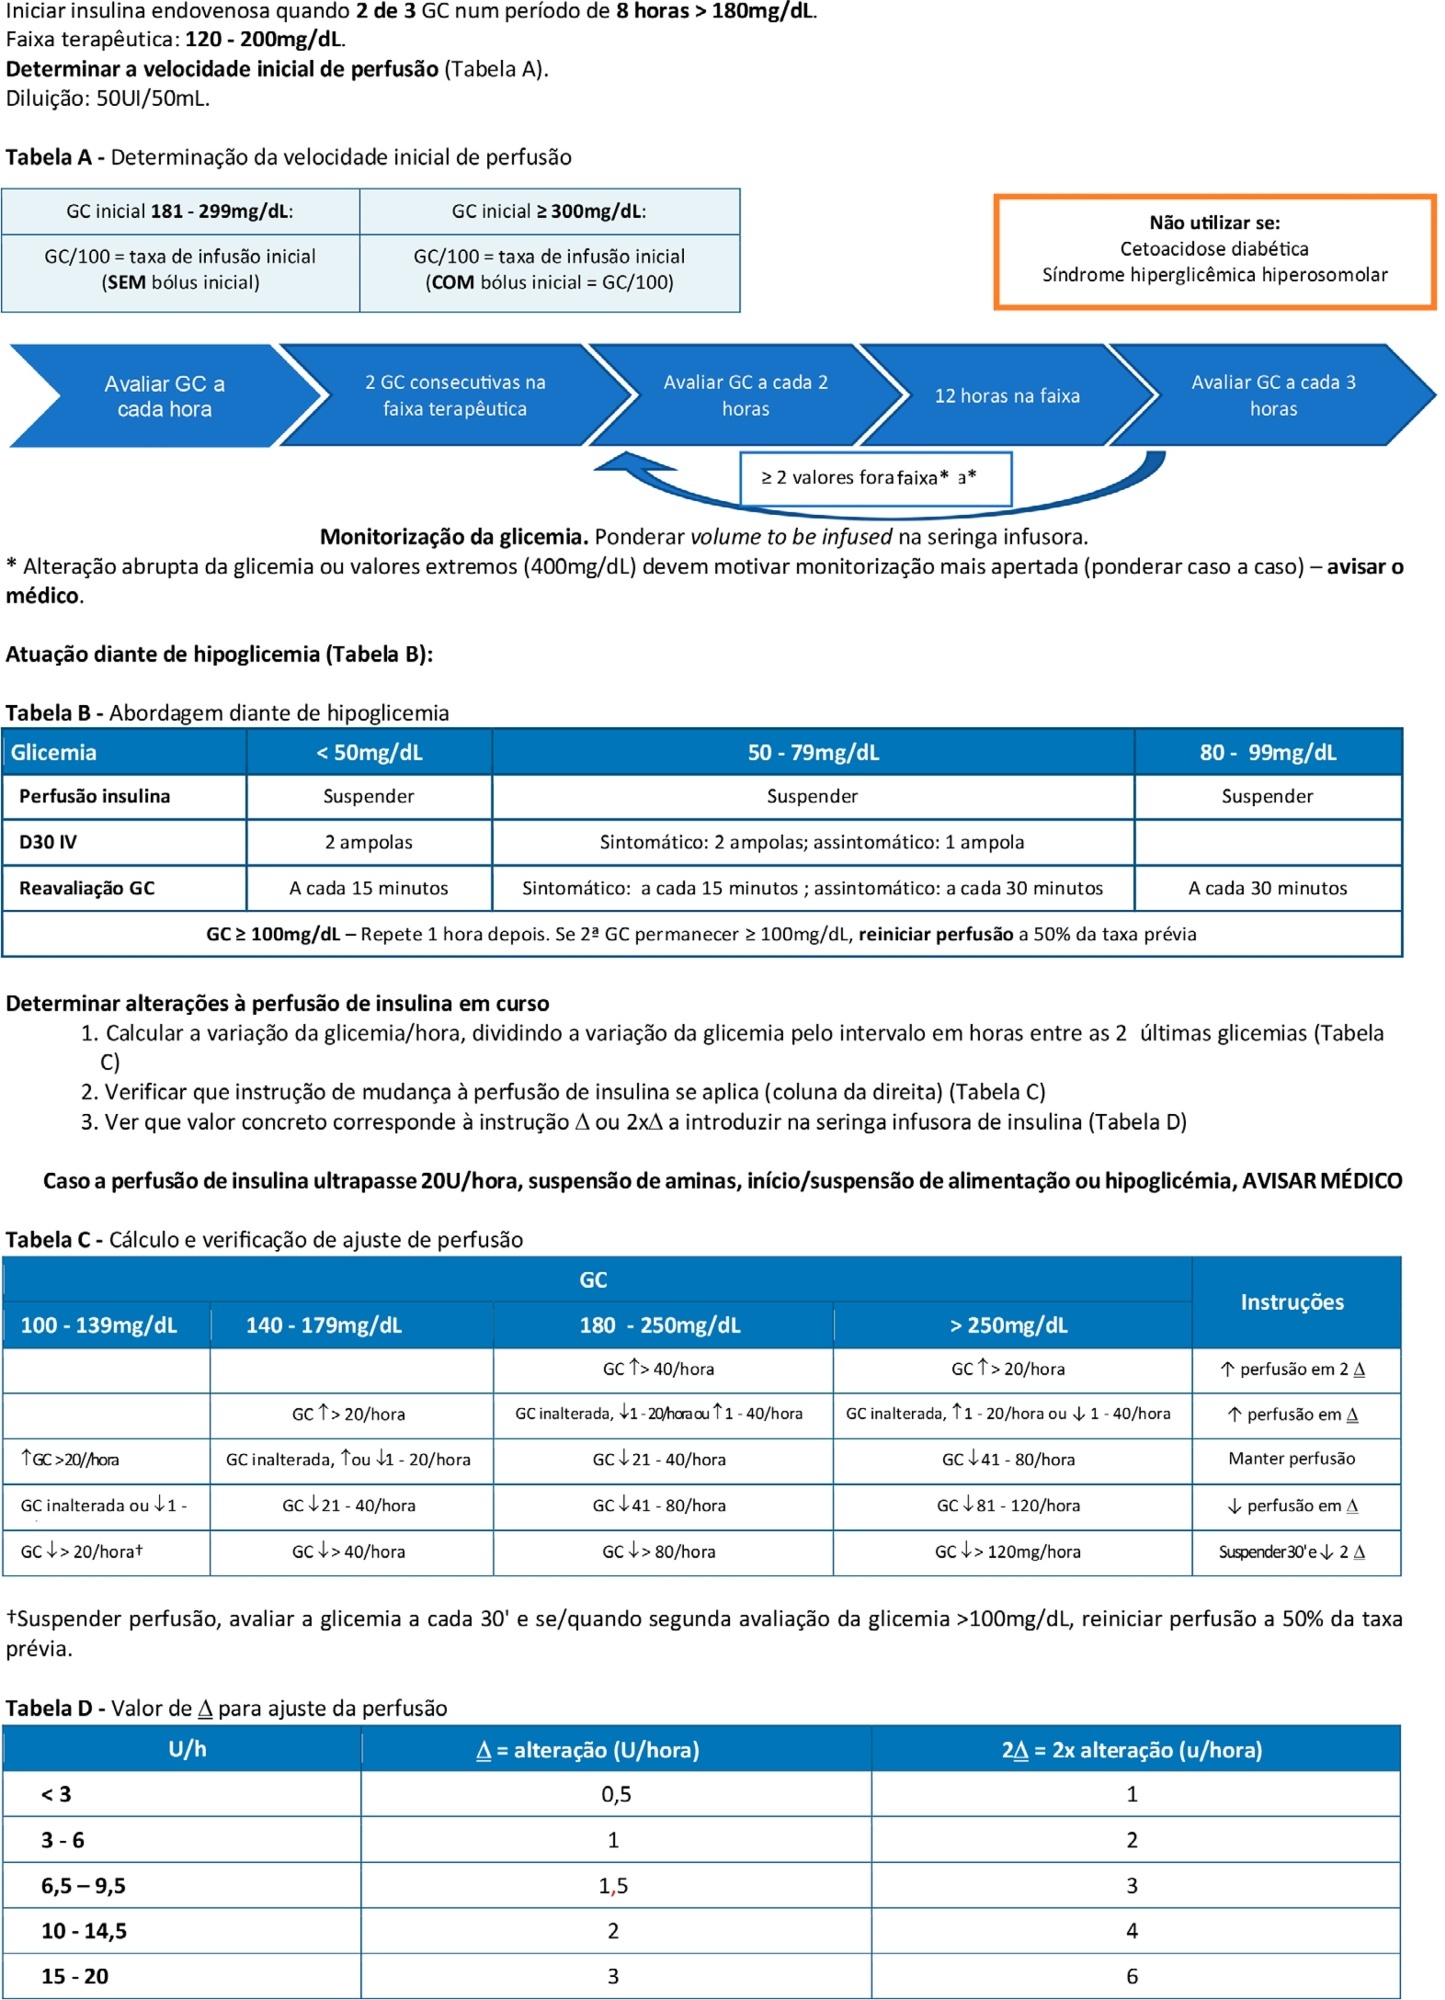 GlucoSTRESS – A project to optimize glycemic control in a level C (III) Portuguese intensive care unit